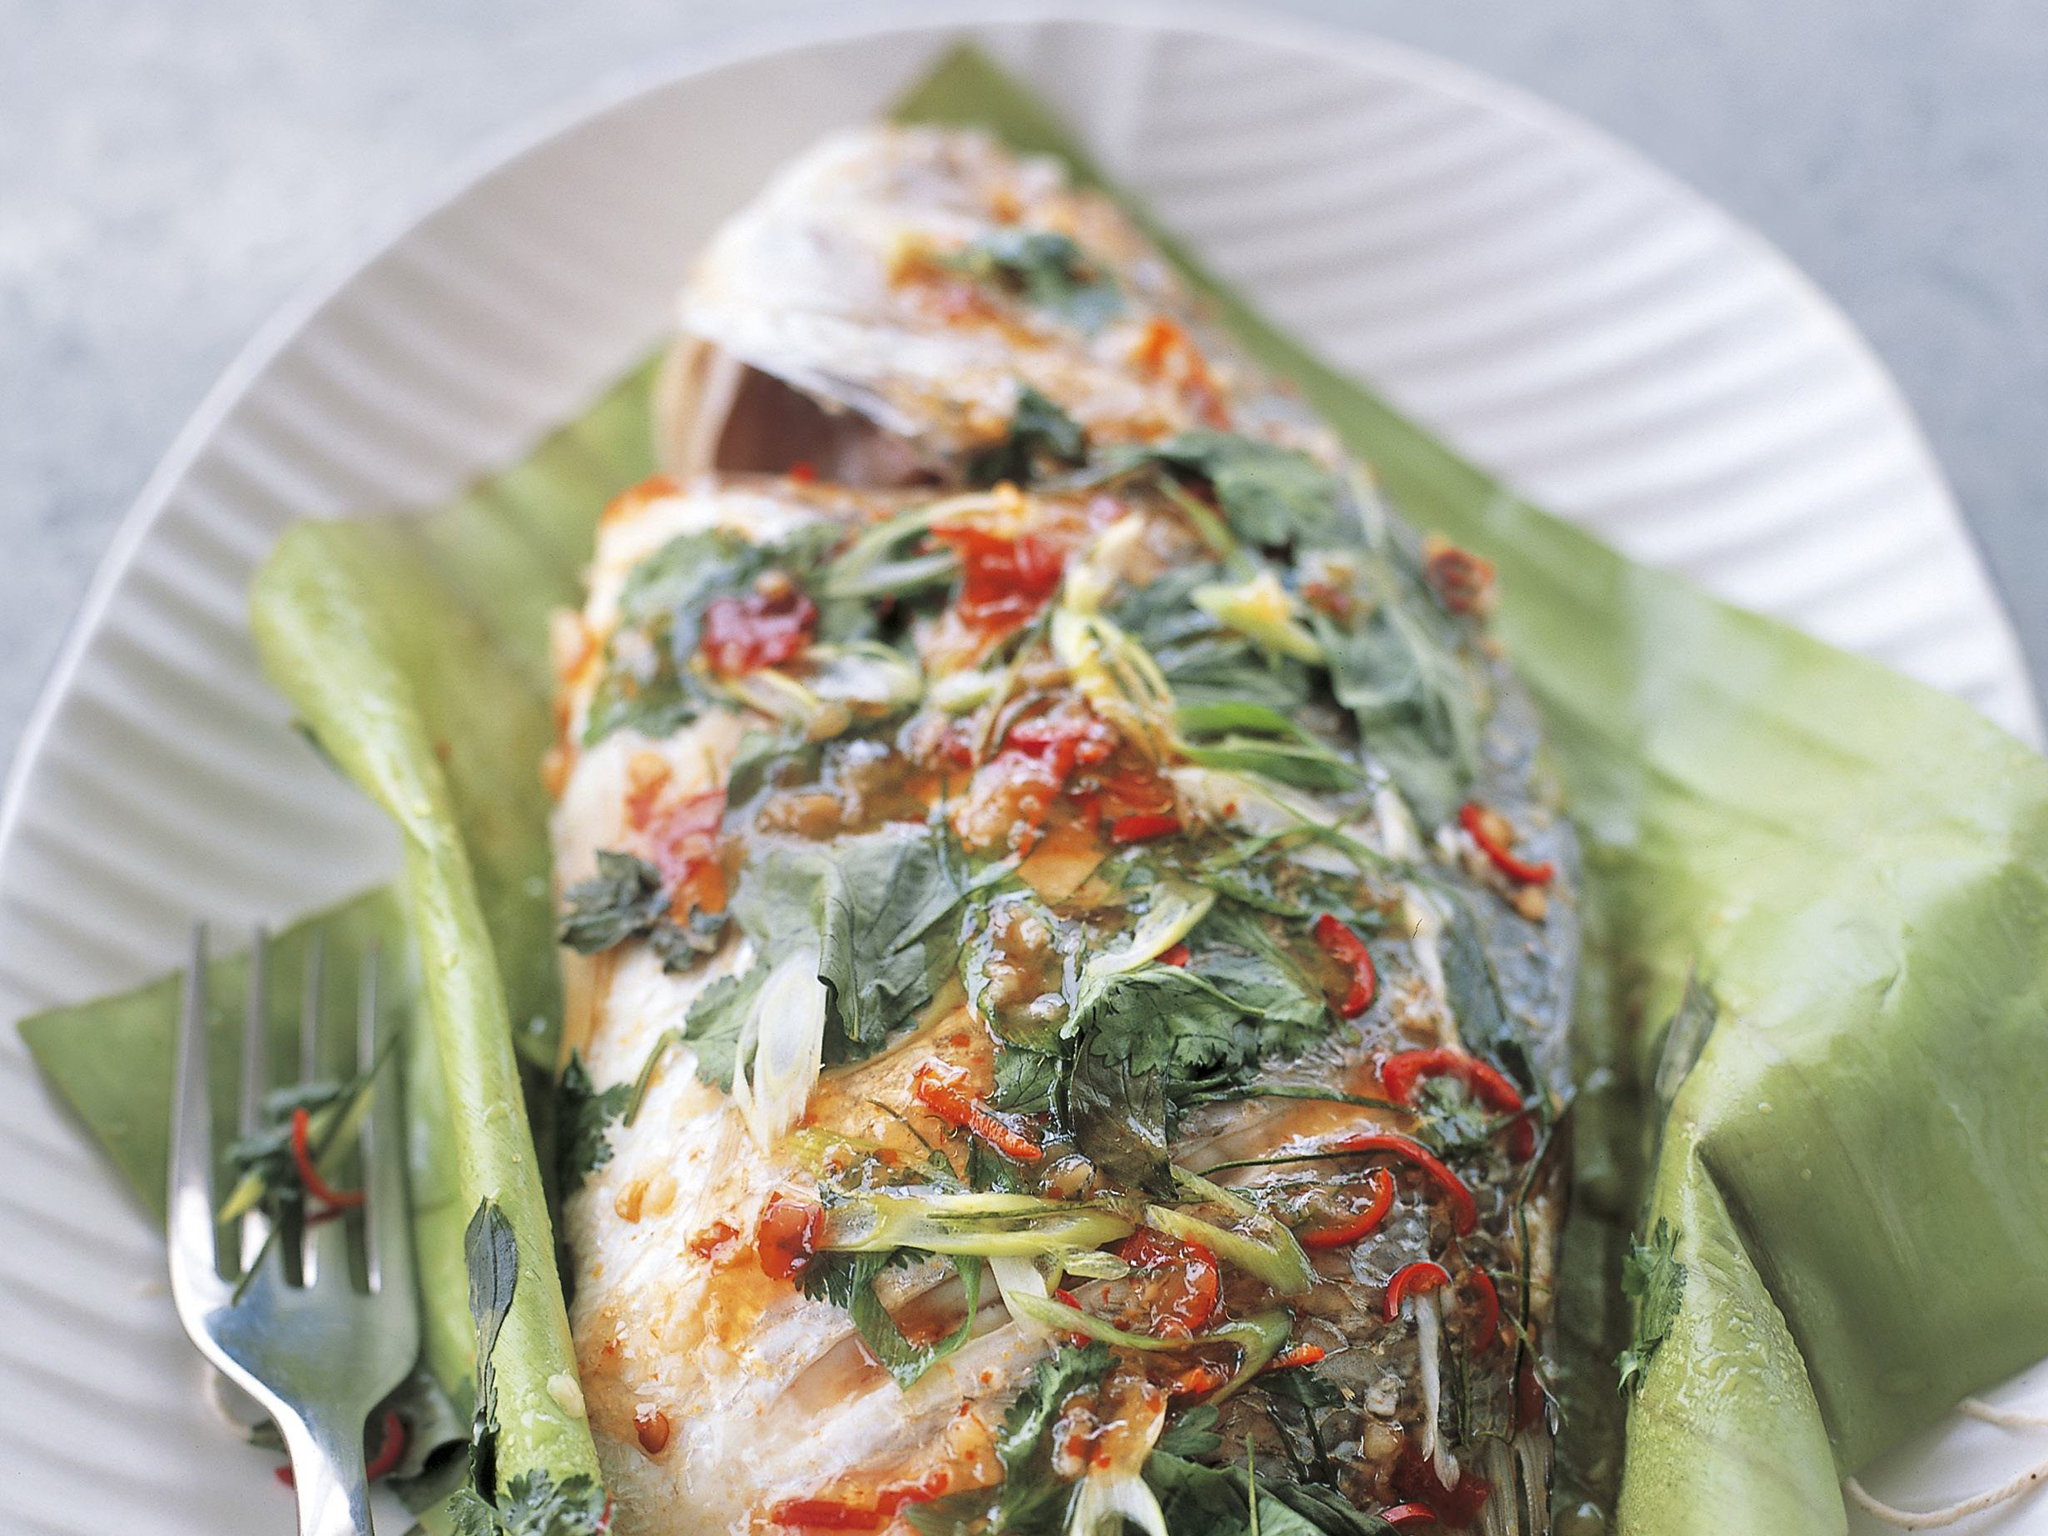 Whole Thai-style steamed fish